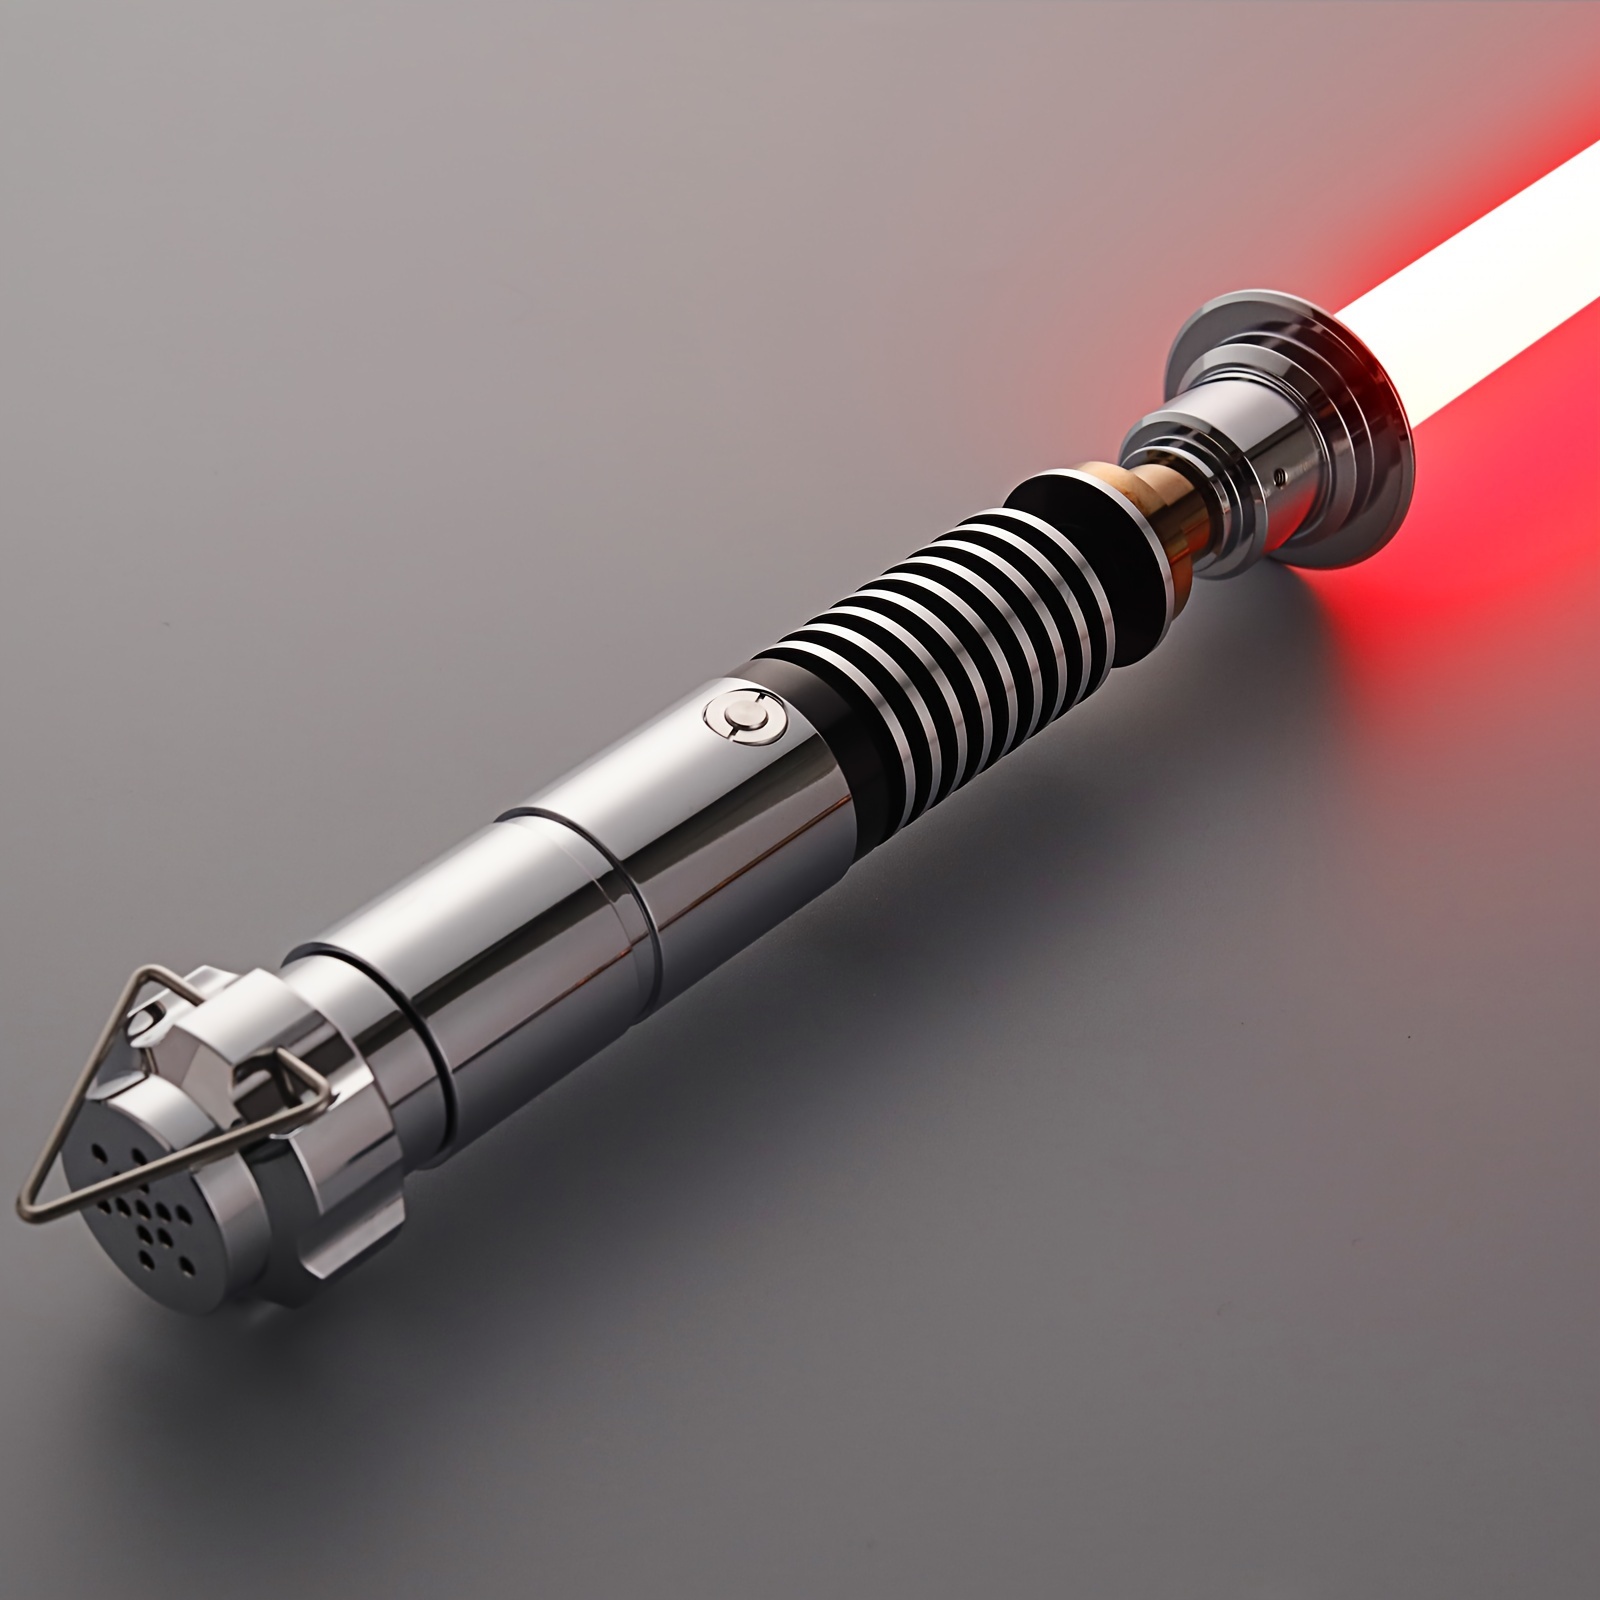 

Dupengda Luke V1 Neopixel17 Sets Of Light Effectsrgb16 Sets Of Light Effects High Quality Dueling Lightsaber34 Sets Of Sound Effects 3000mahrechargeable Battery Role Playing Prop Aluminum Alloy Handle